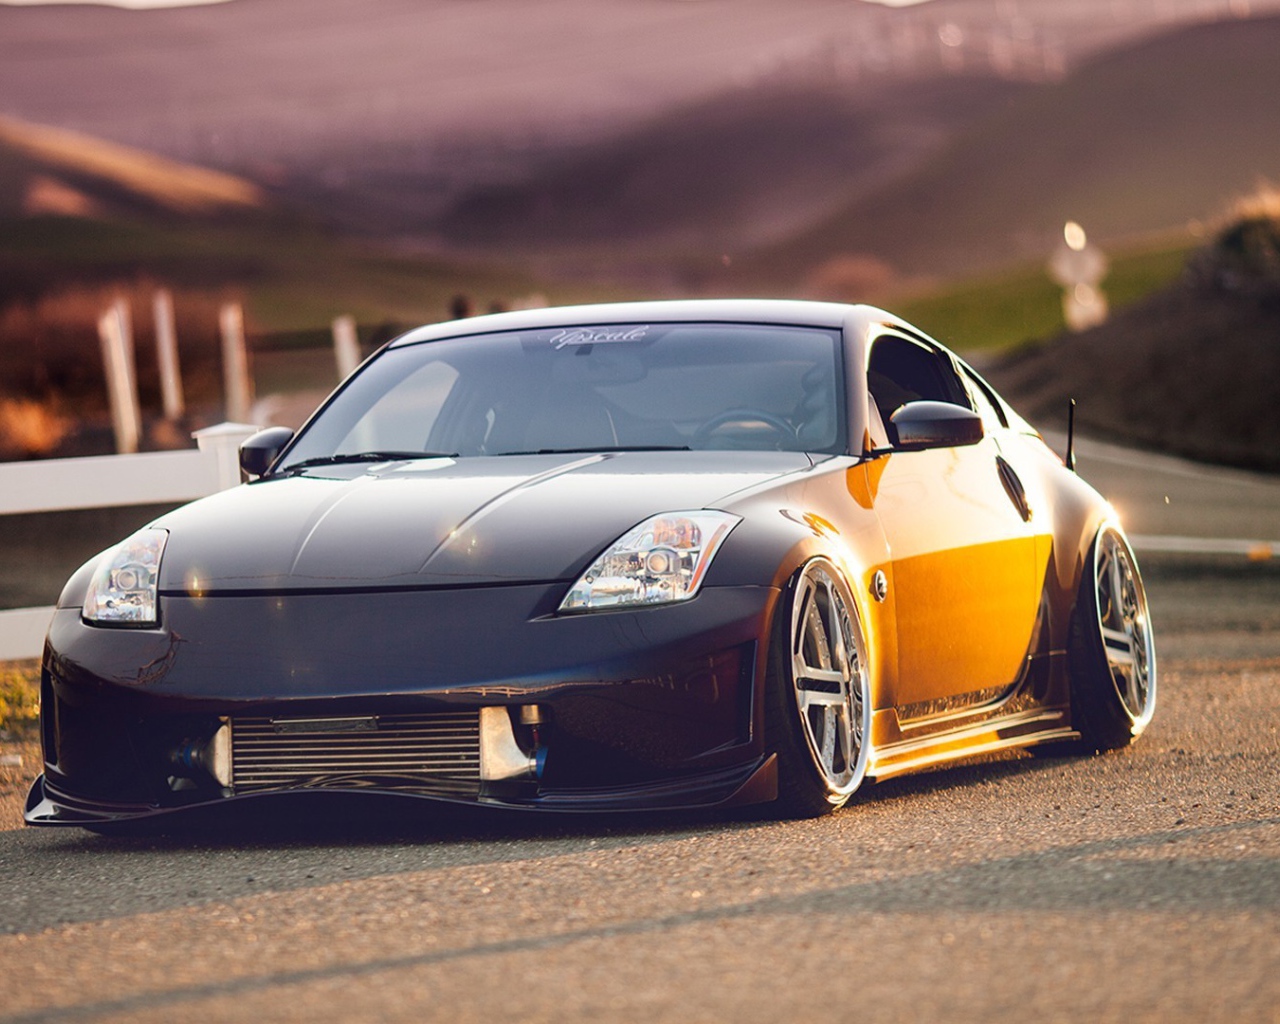 Tuned Nissan 350Z on the road